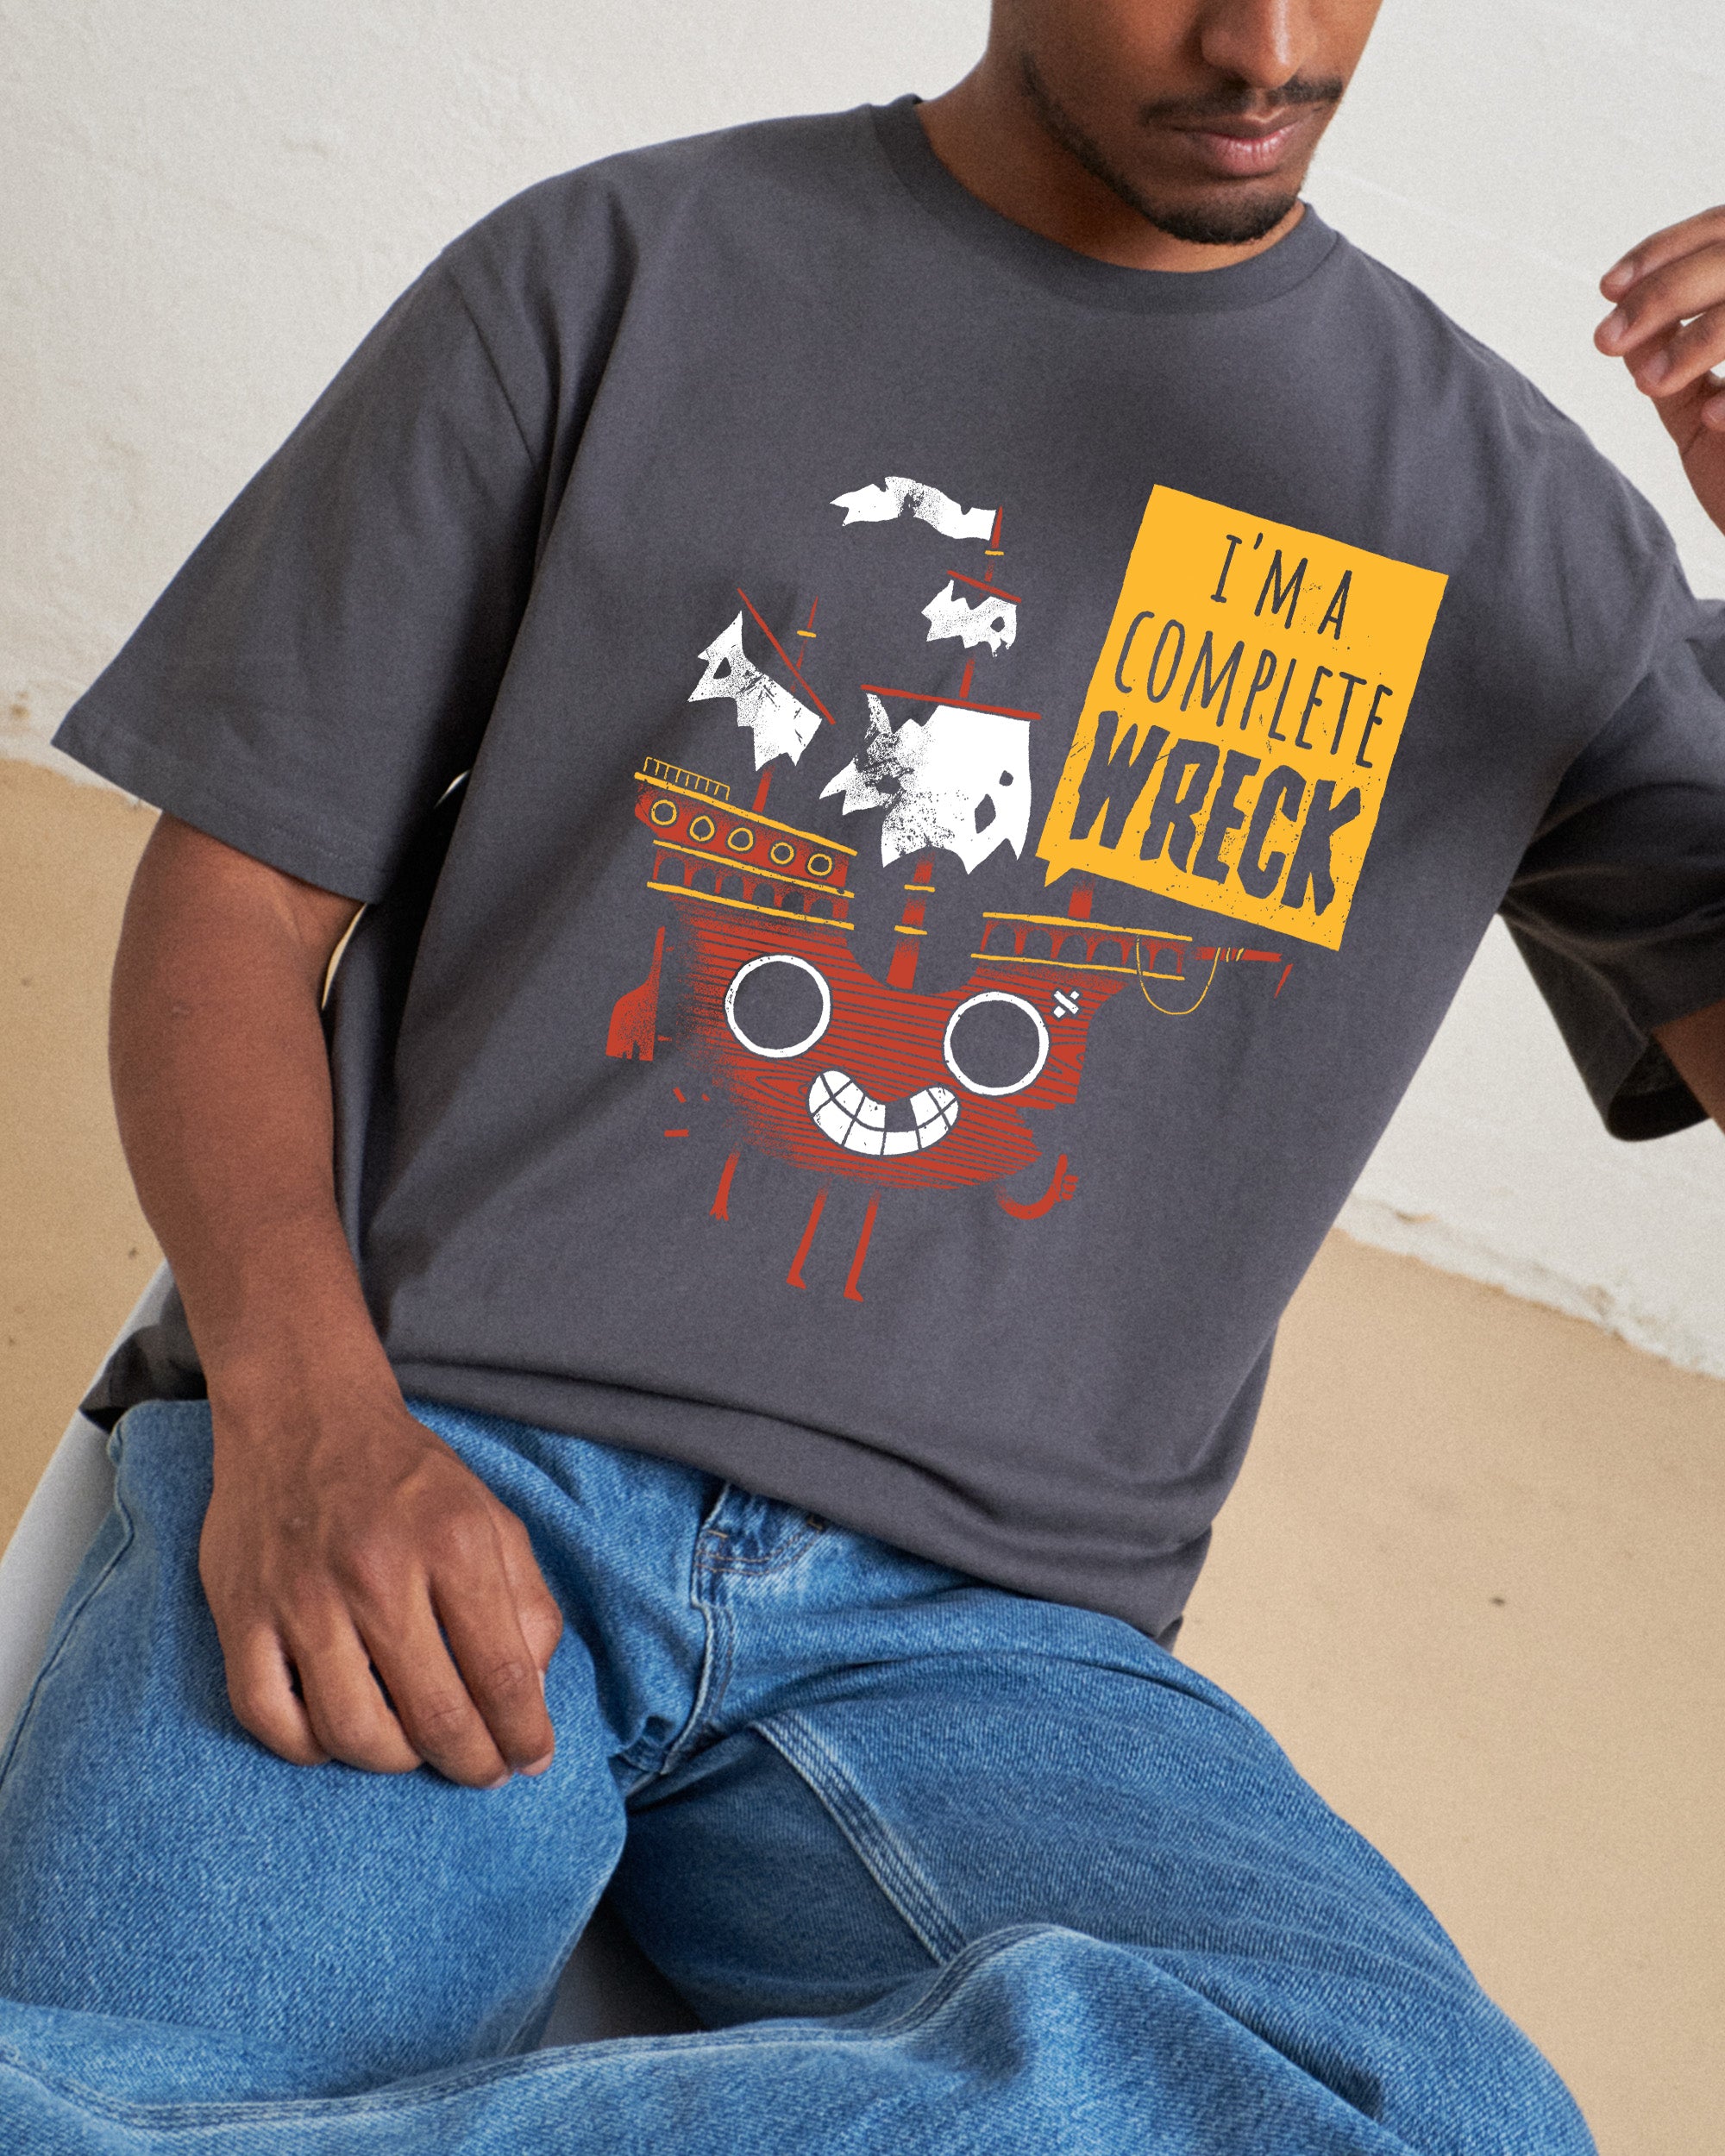 I'm a Complete Wreck T-Shirt